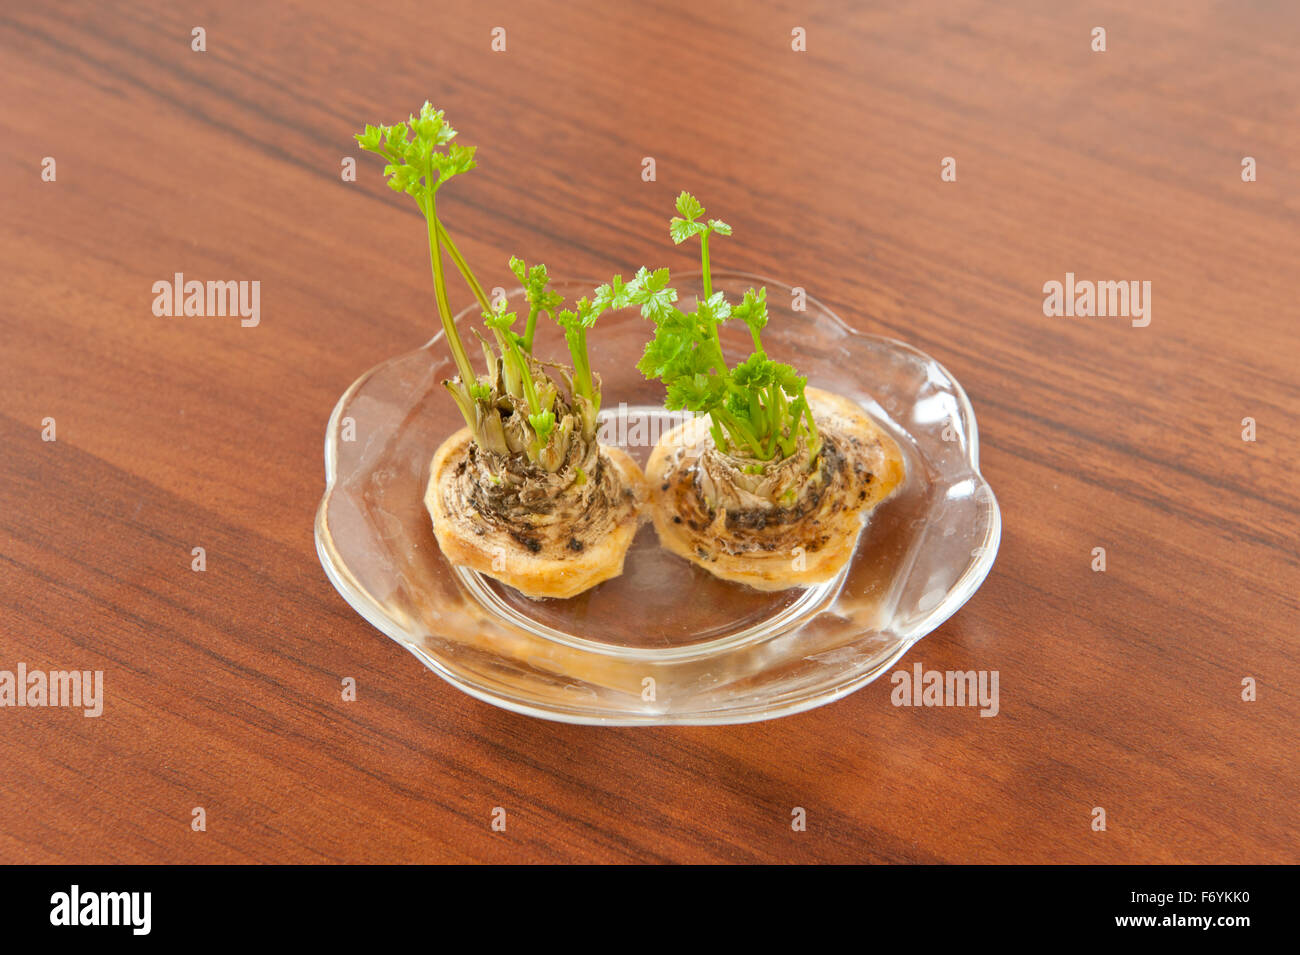 Cut parsley tops sprouting, burgeon fresh green shoot leaves growing from cut Petroselinum crispum vegetable roots pieces ... Stock Photo